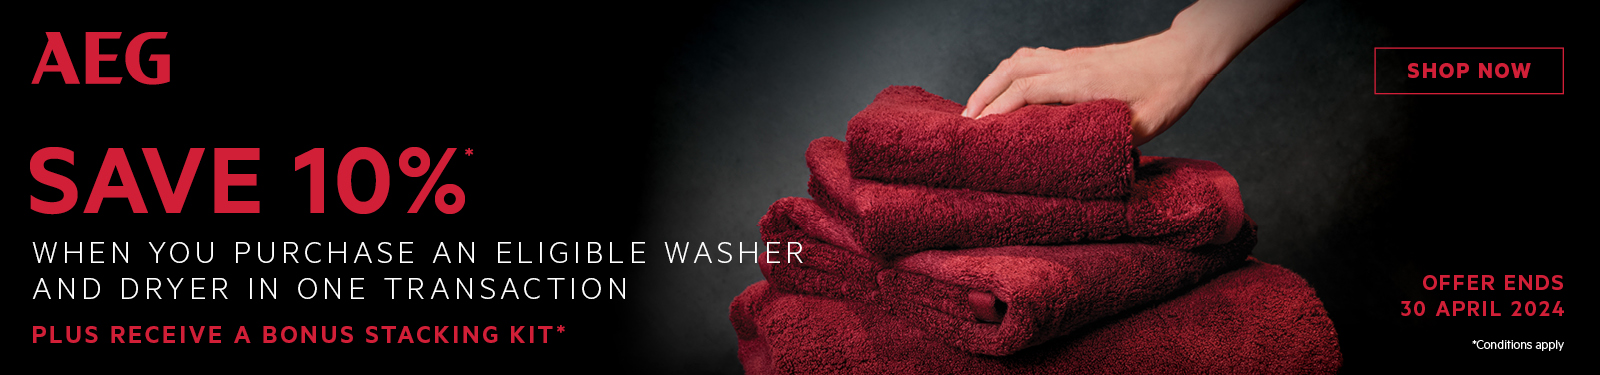 Save 10% When You Purchase An AEG Washing Machine and Dryer In One Transaction at Retravision